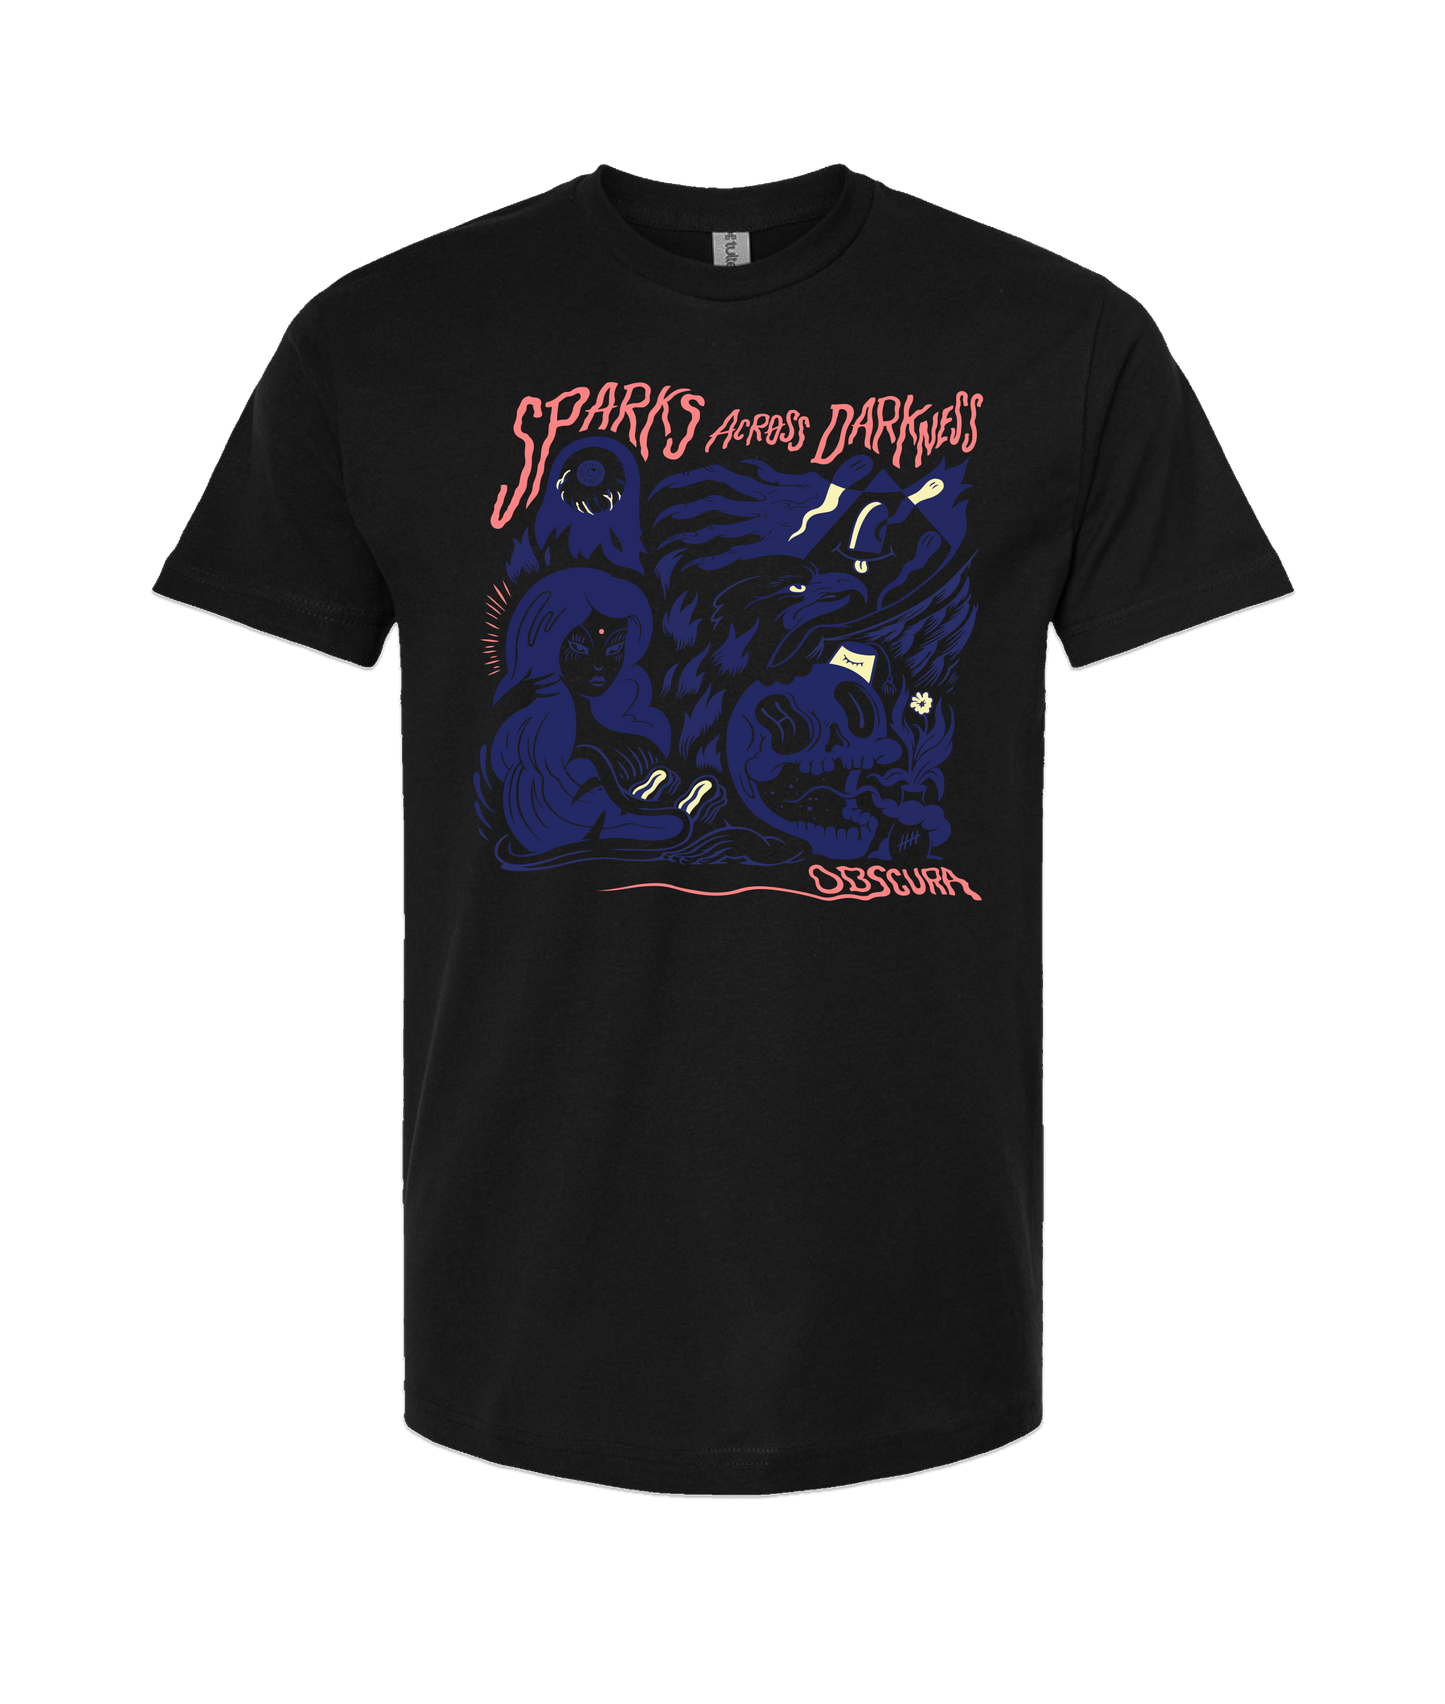 Sparks Across Darkness - Obscura - Black T-Shirt